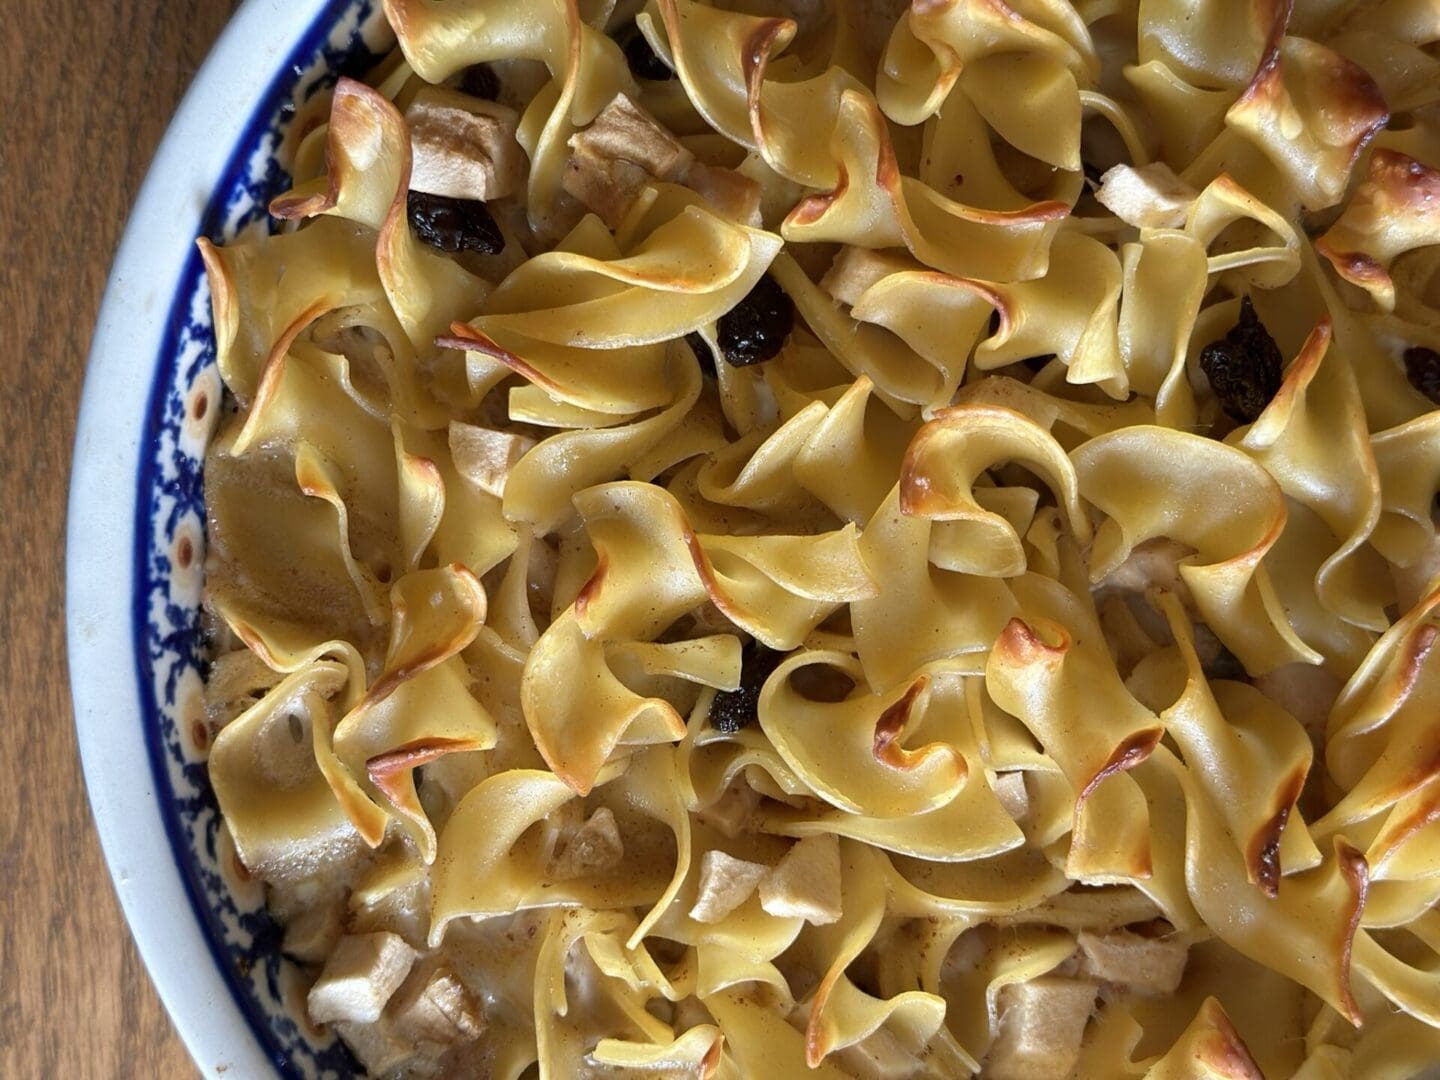 A dish of pasta with raisins and cranberries.